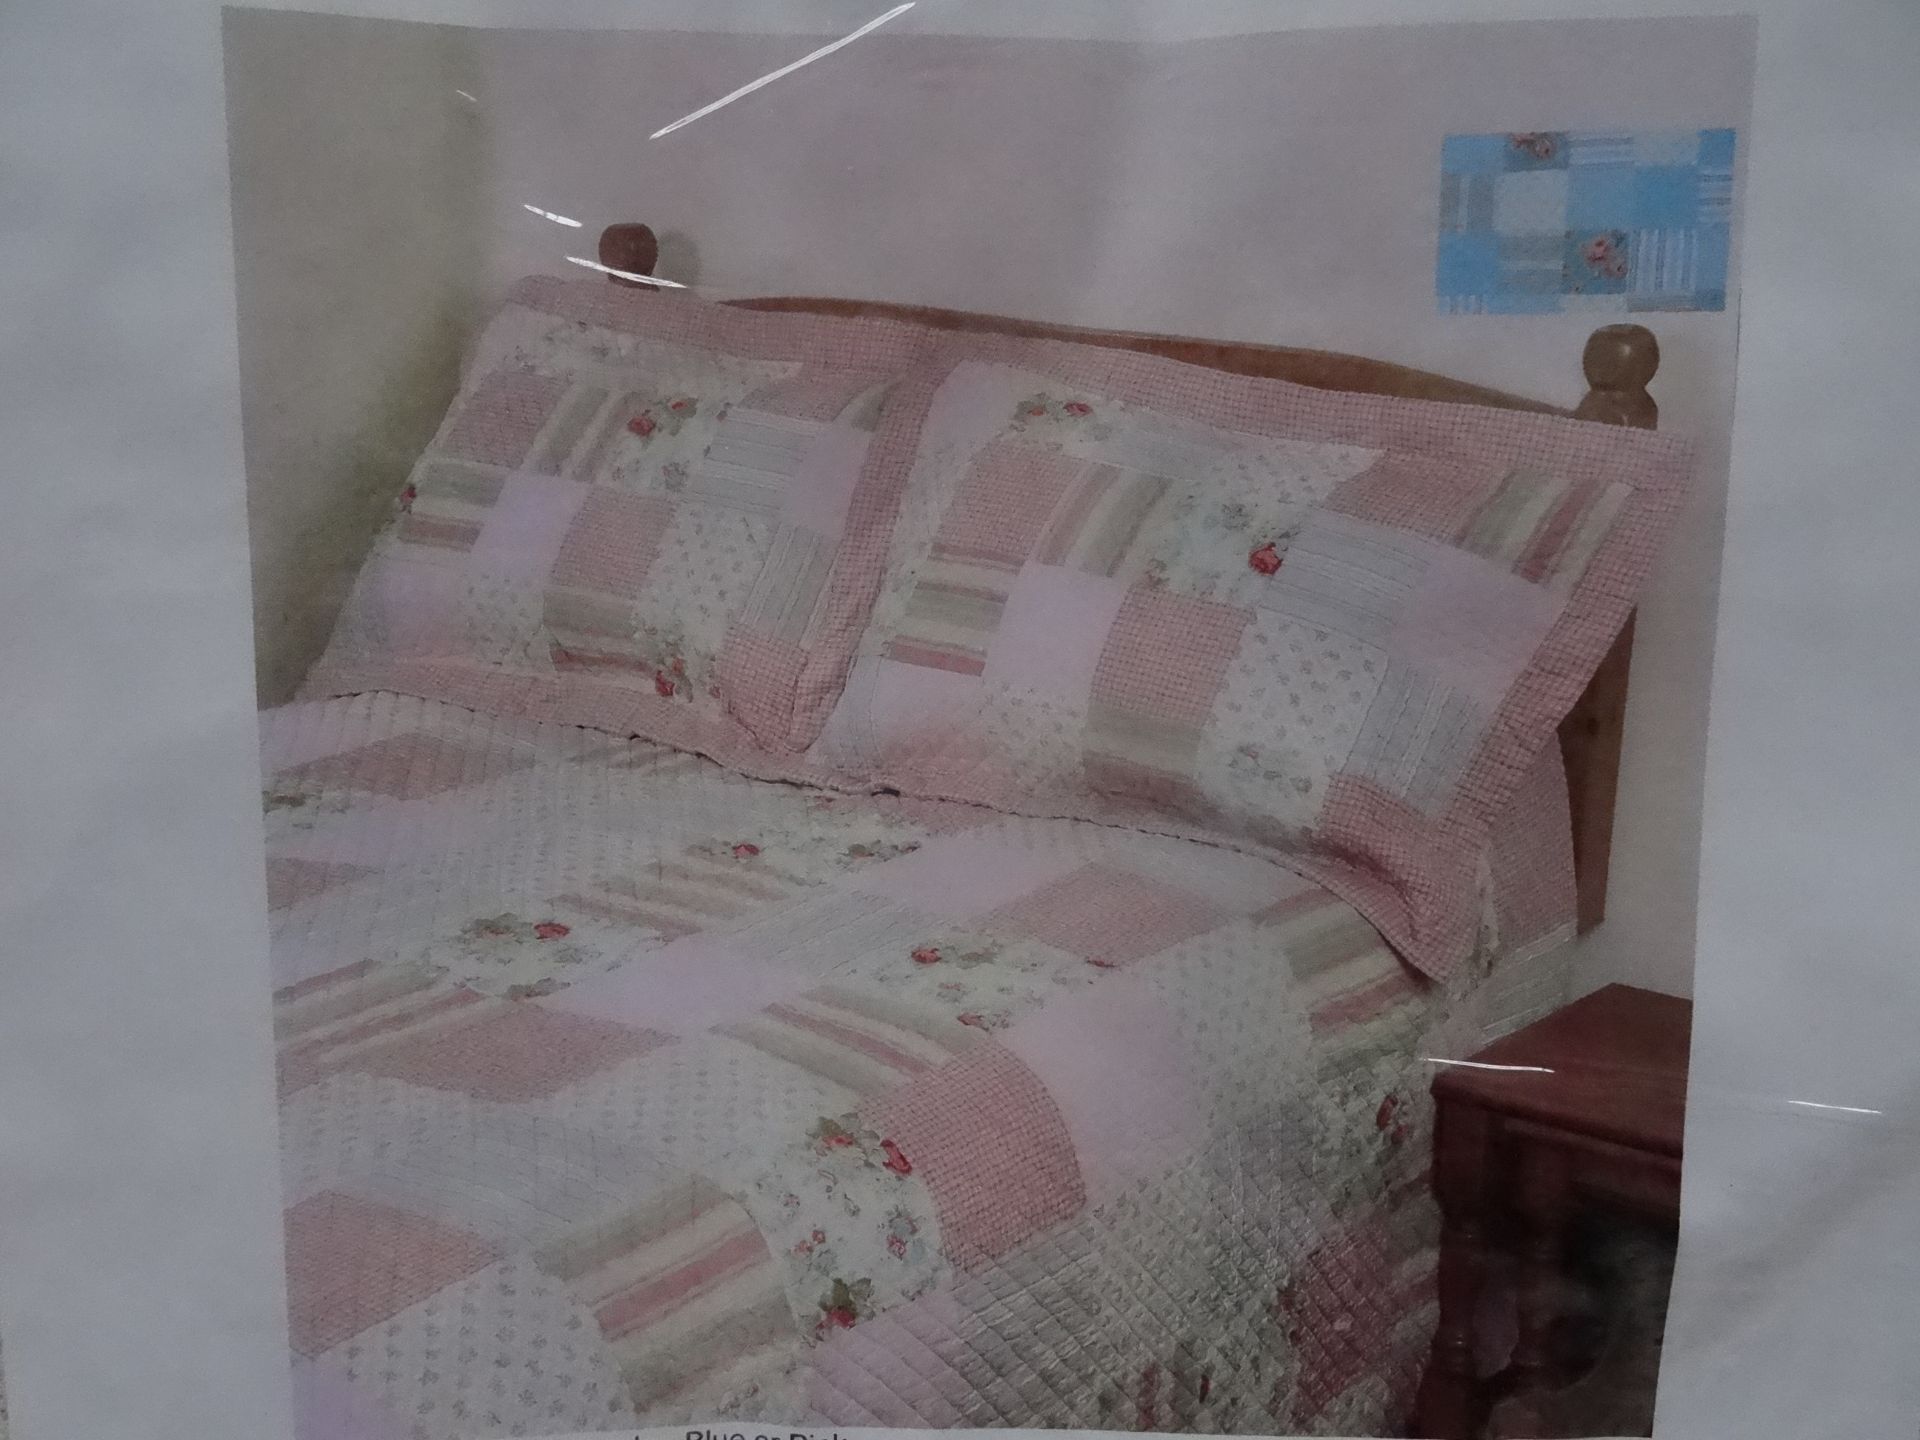 1 x Le Chateau Fine Linens 100% Cotton Quilted Bedspread. Size: Double. Filling 200gm per sqm. - Image 2 of 2